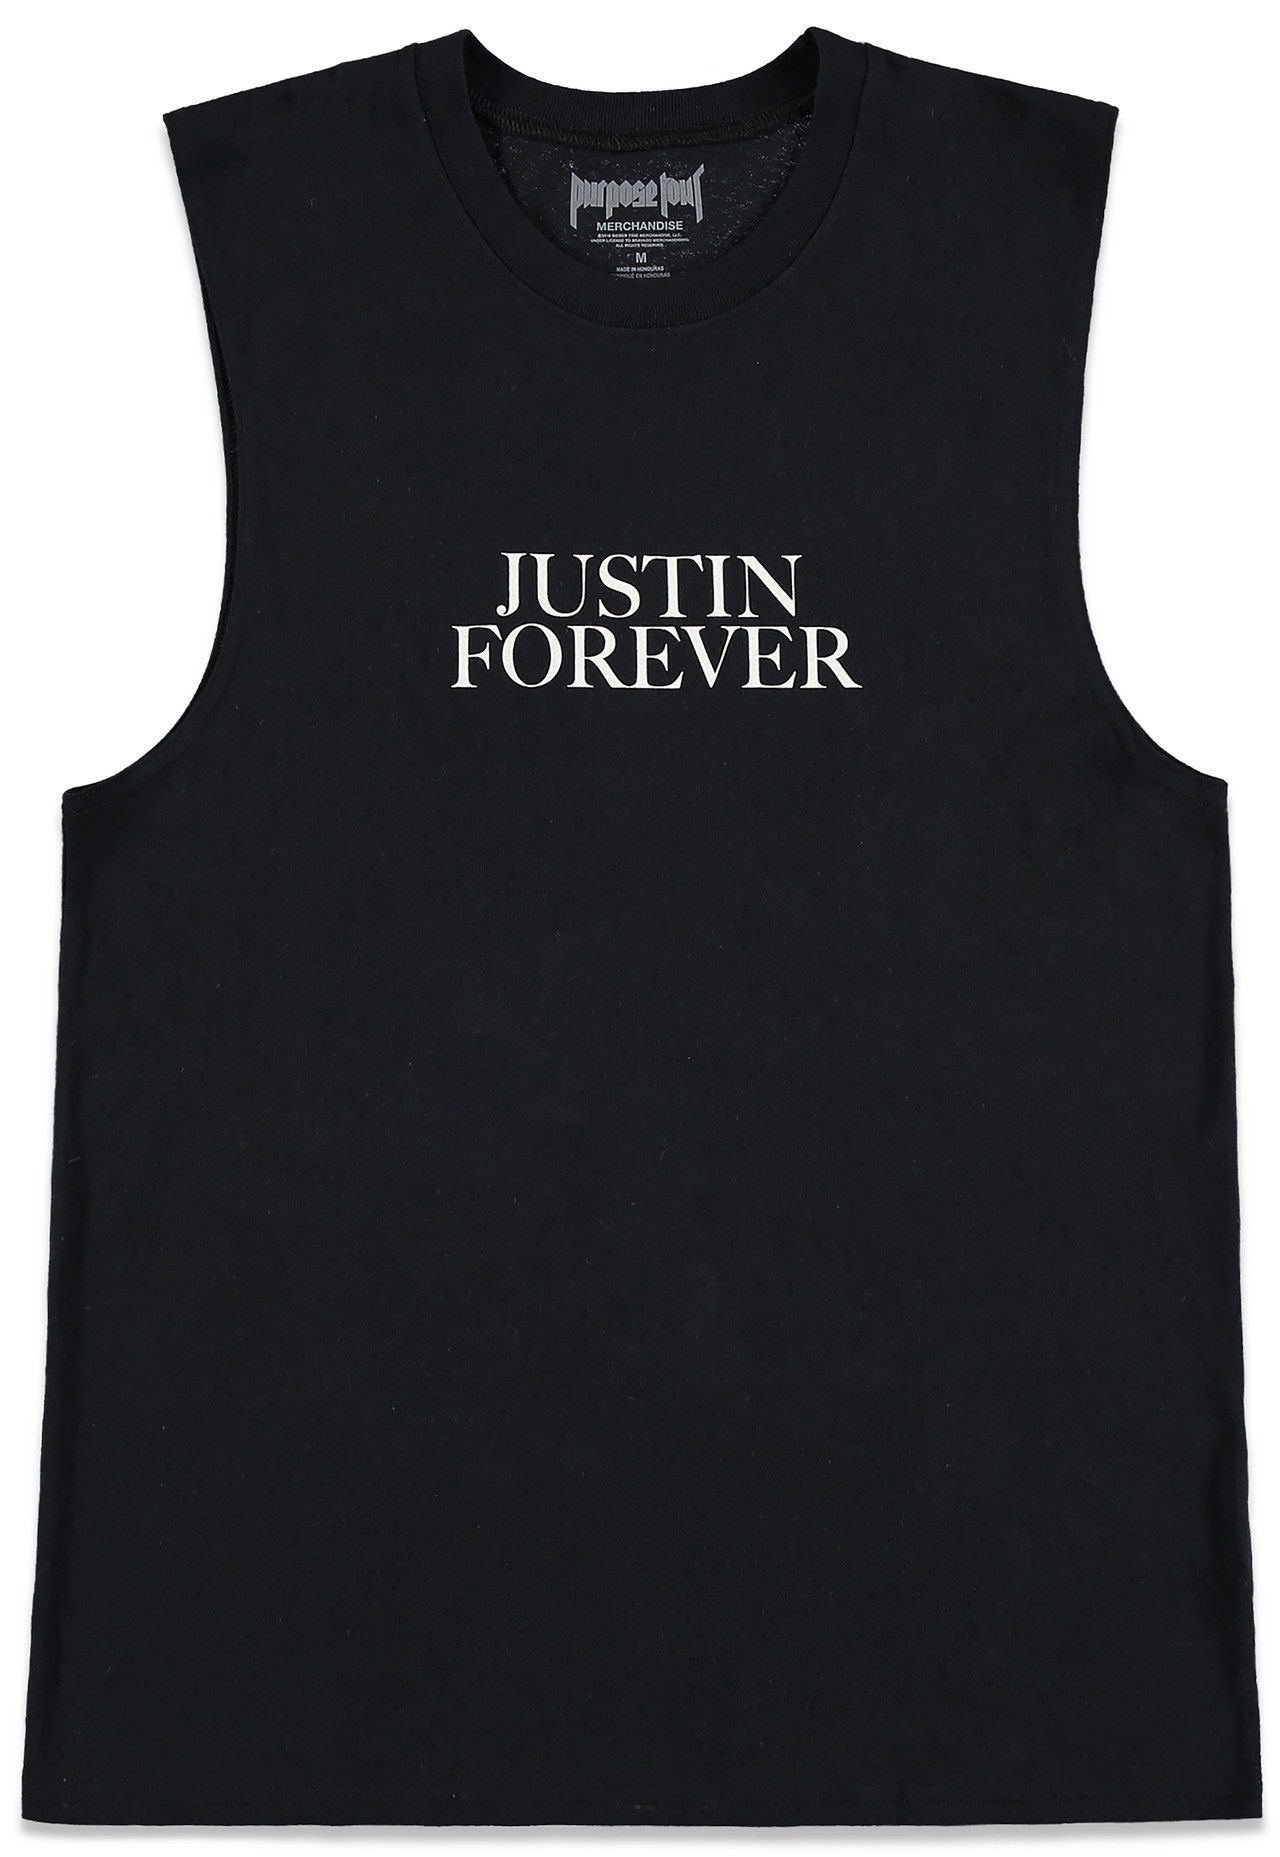 Tank, [$18](http://www.forever21.com/Product/Product.aspx?BR=f21&Category=promo-purpose-tour&ProductID=2000231524&VariantID=011)